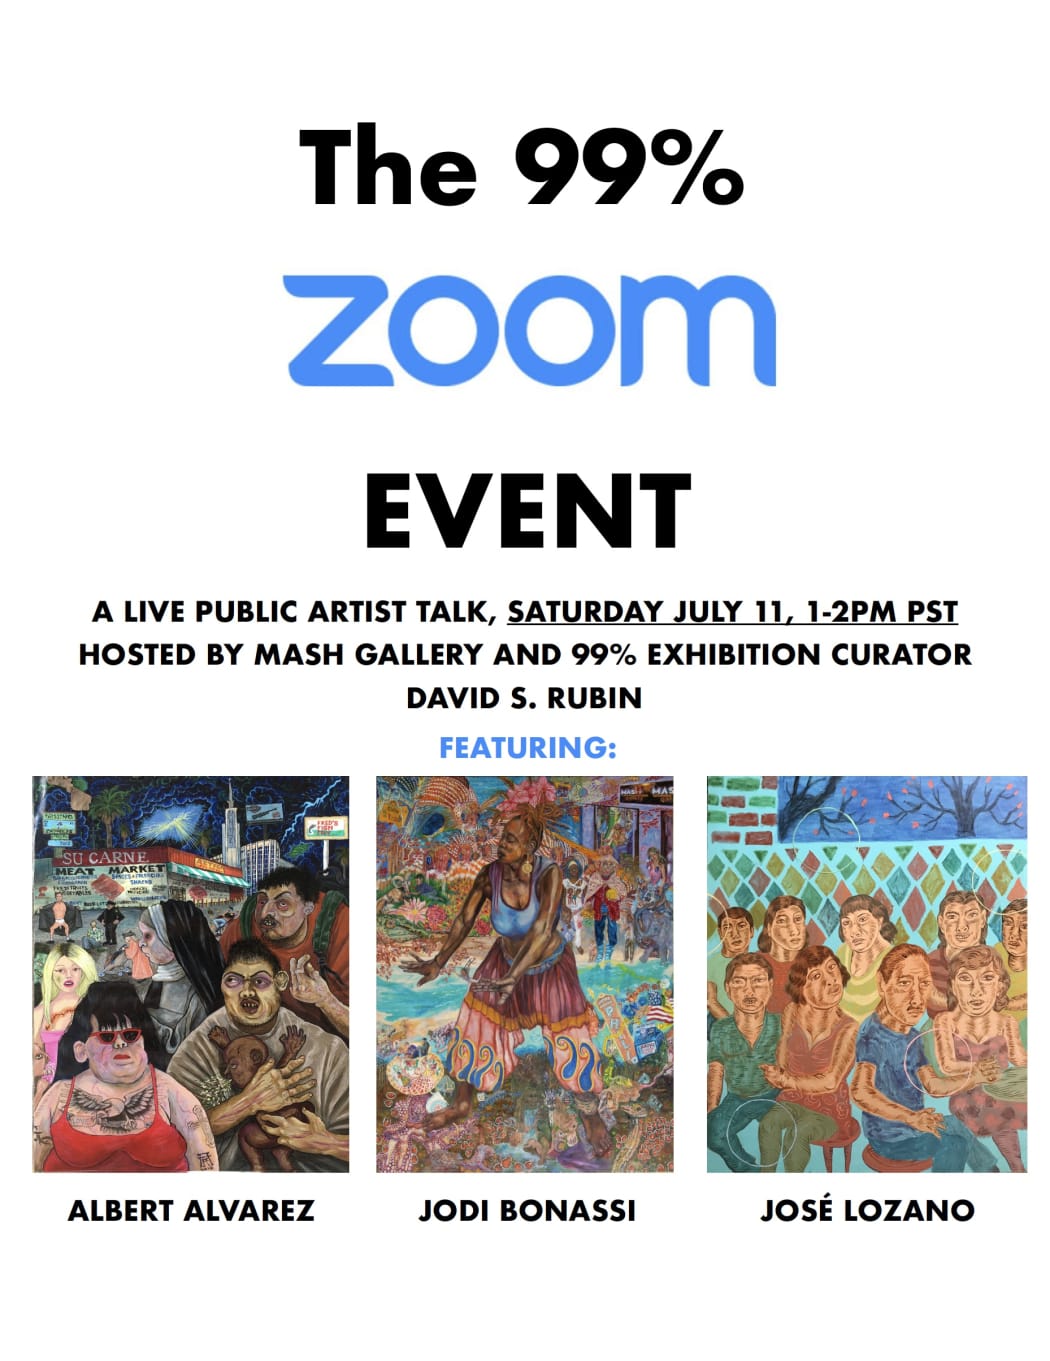 The 99% Zoom Event